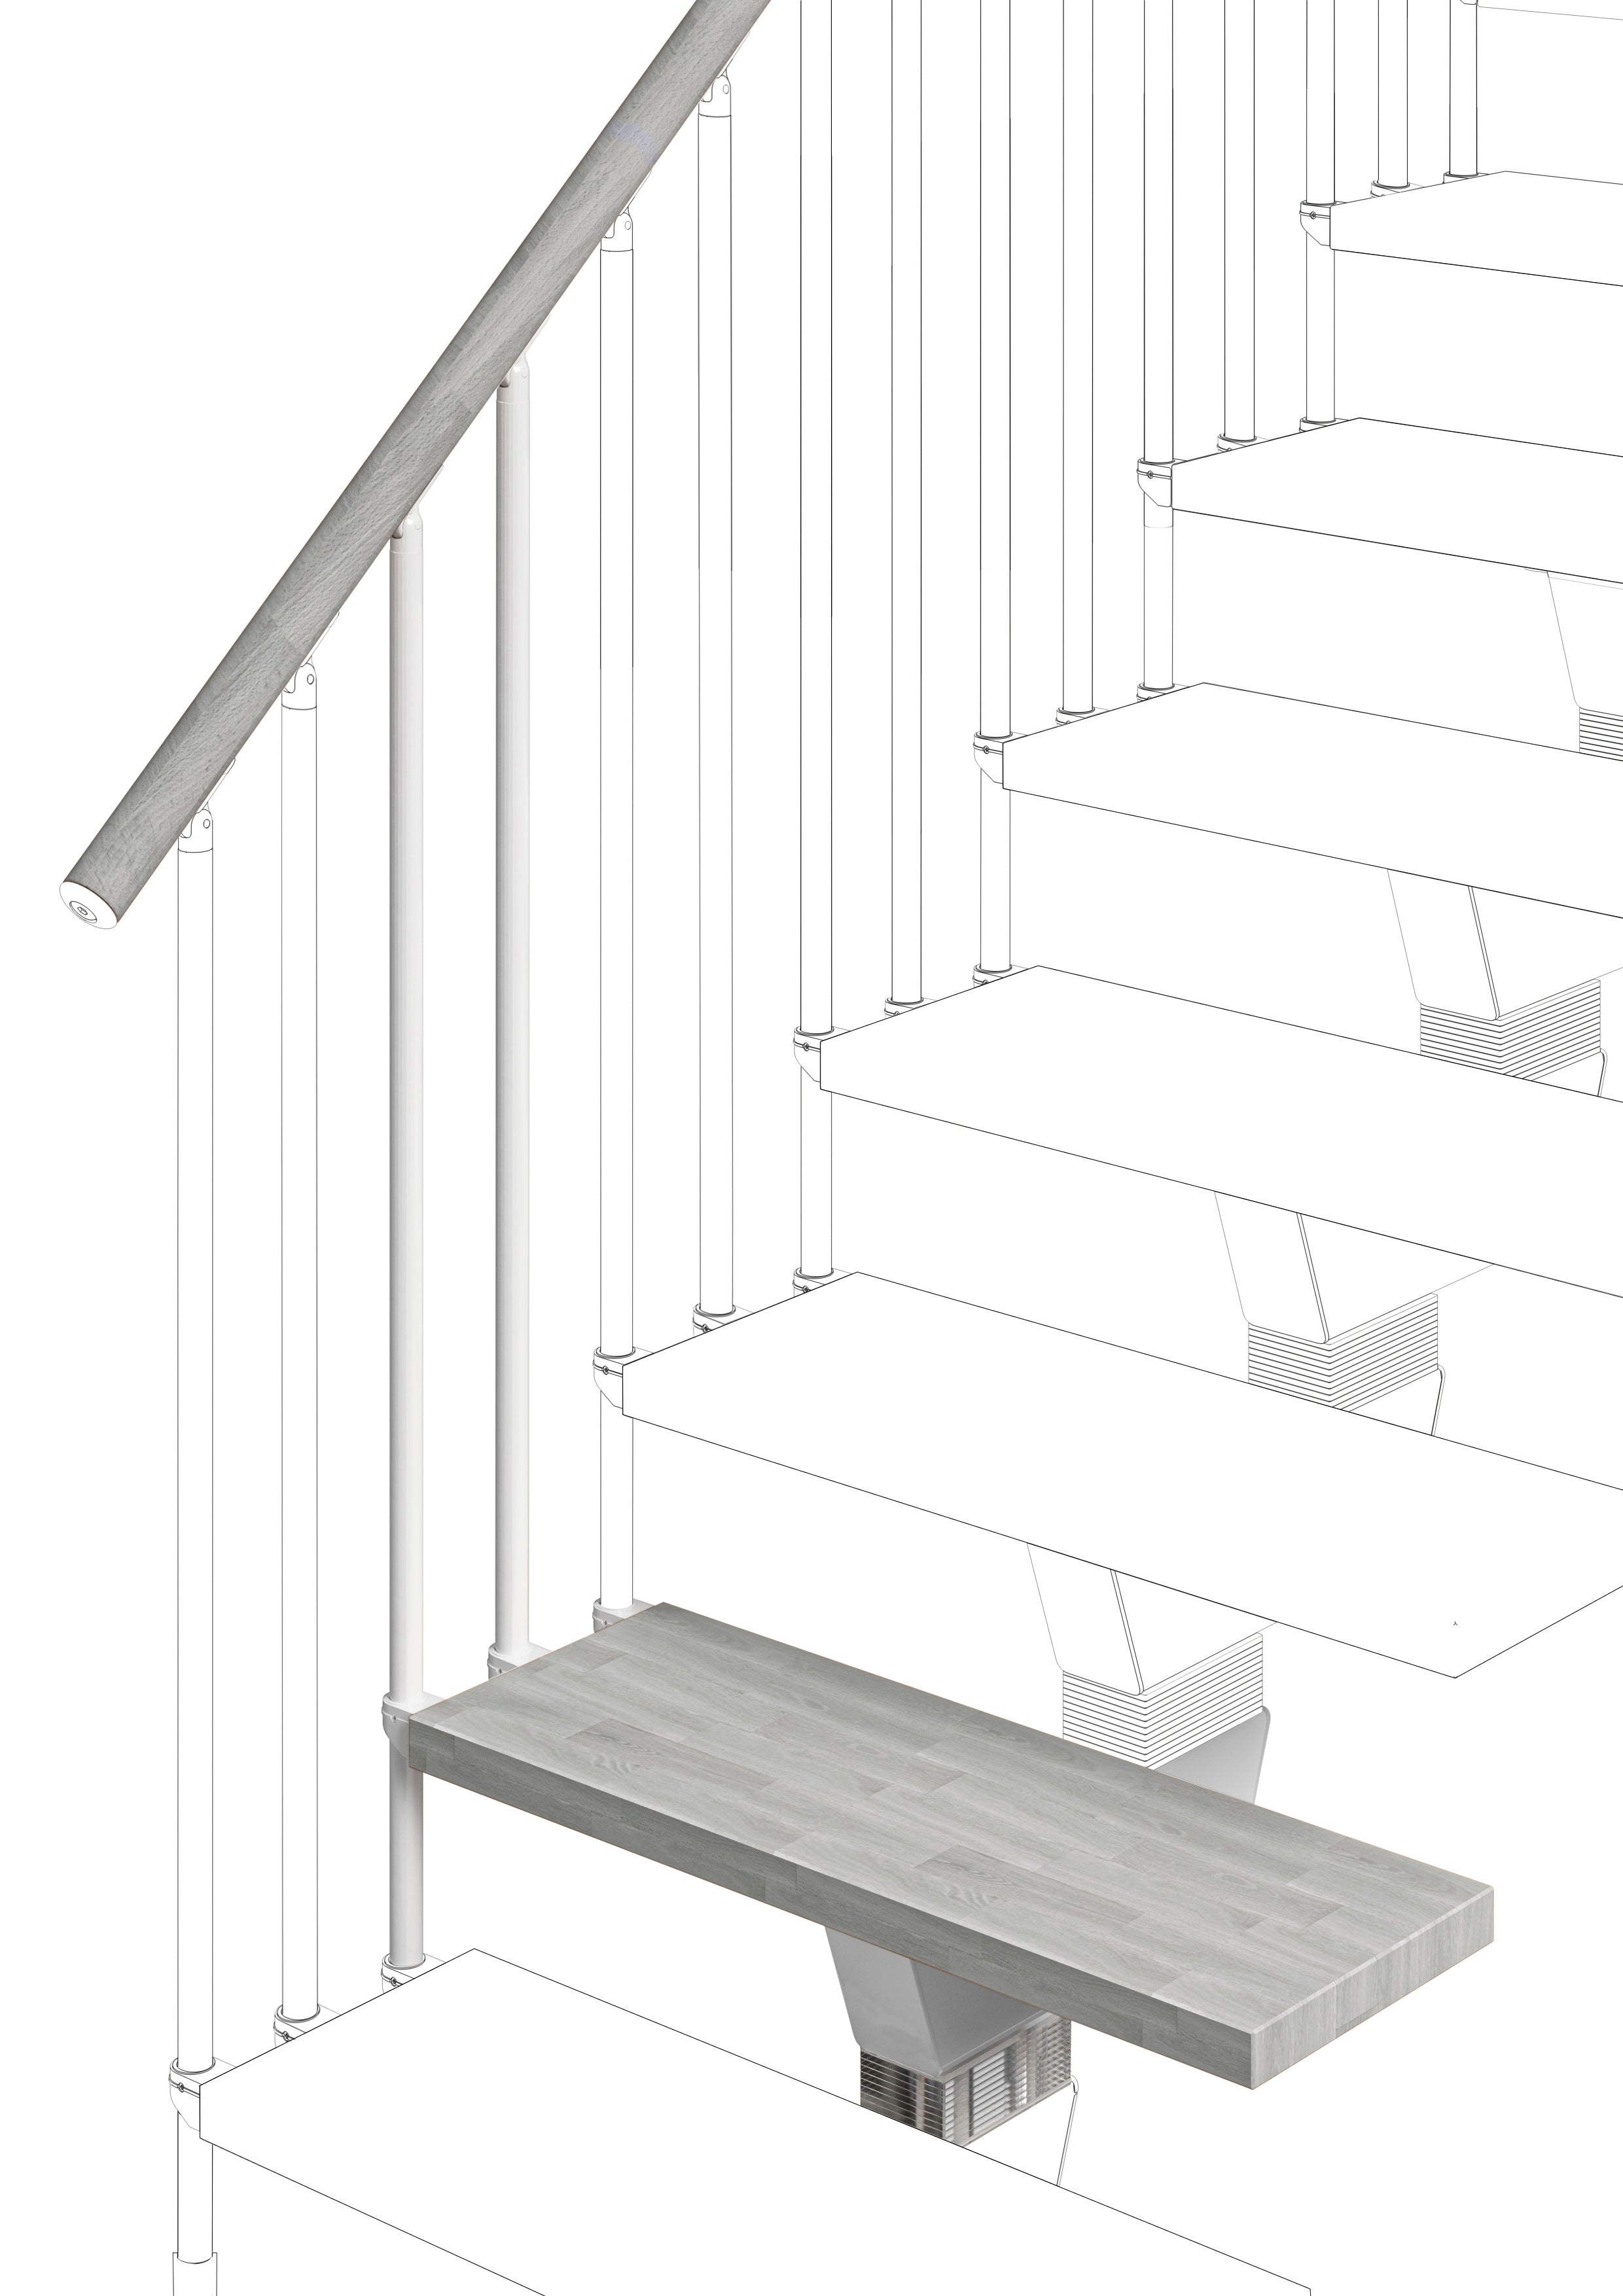 Additional step Modularis 85cm (with structure and railing) - Cement 89